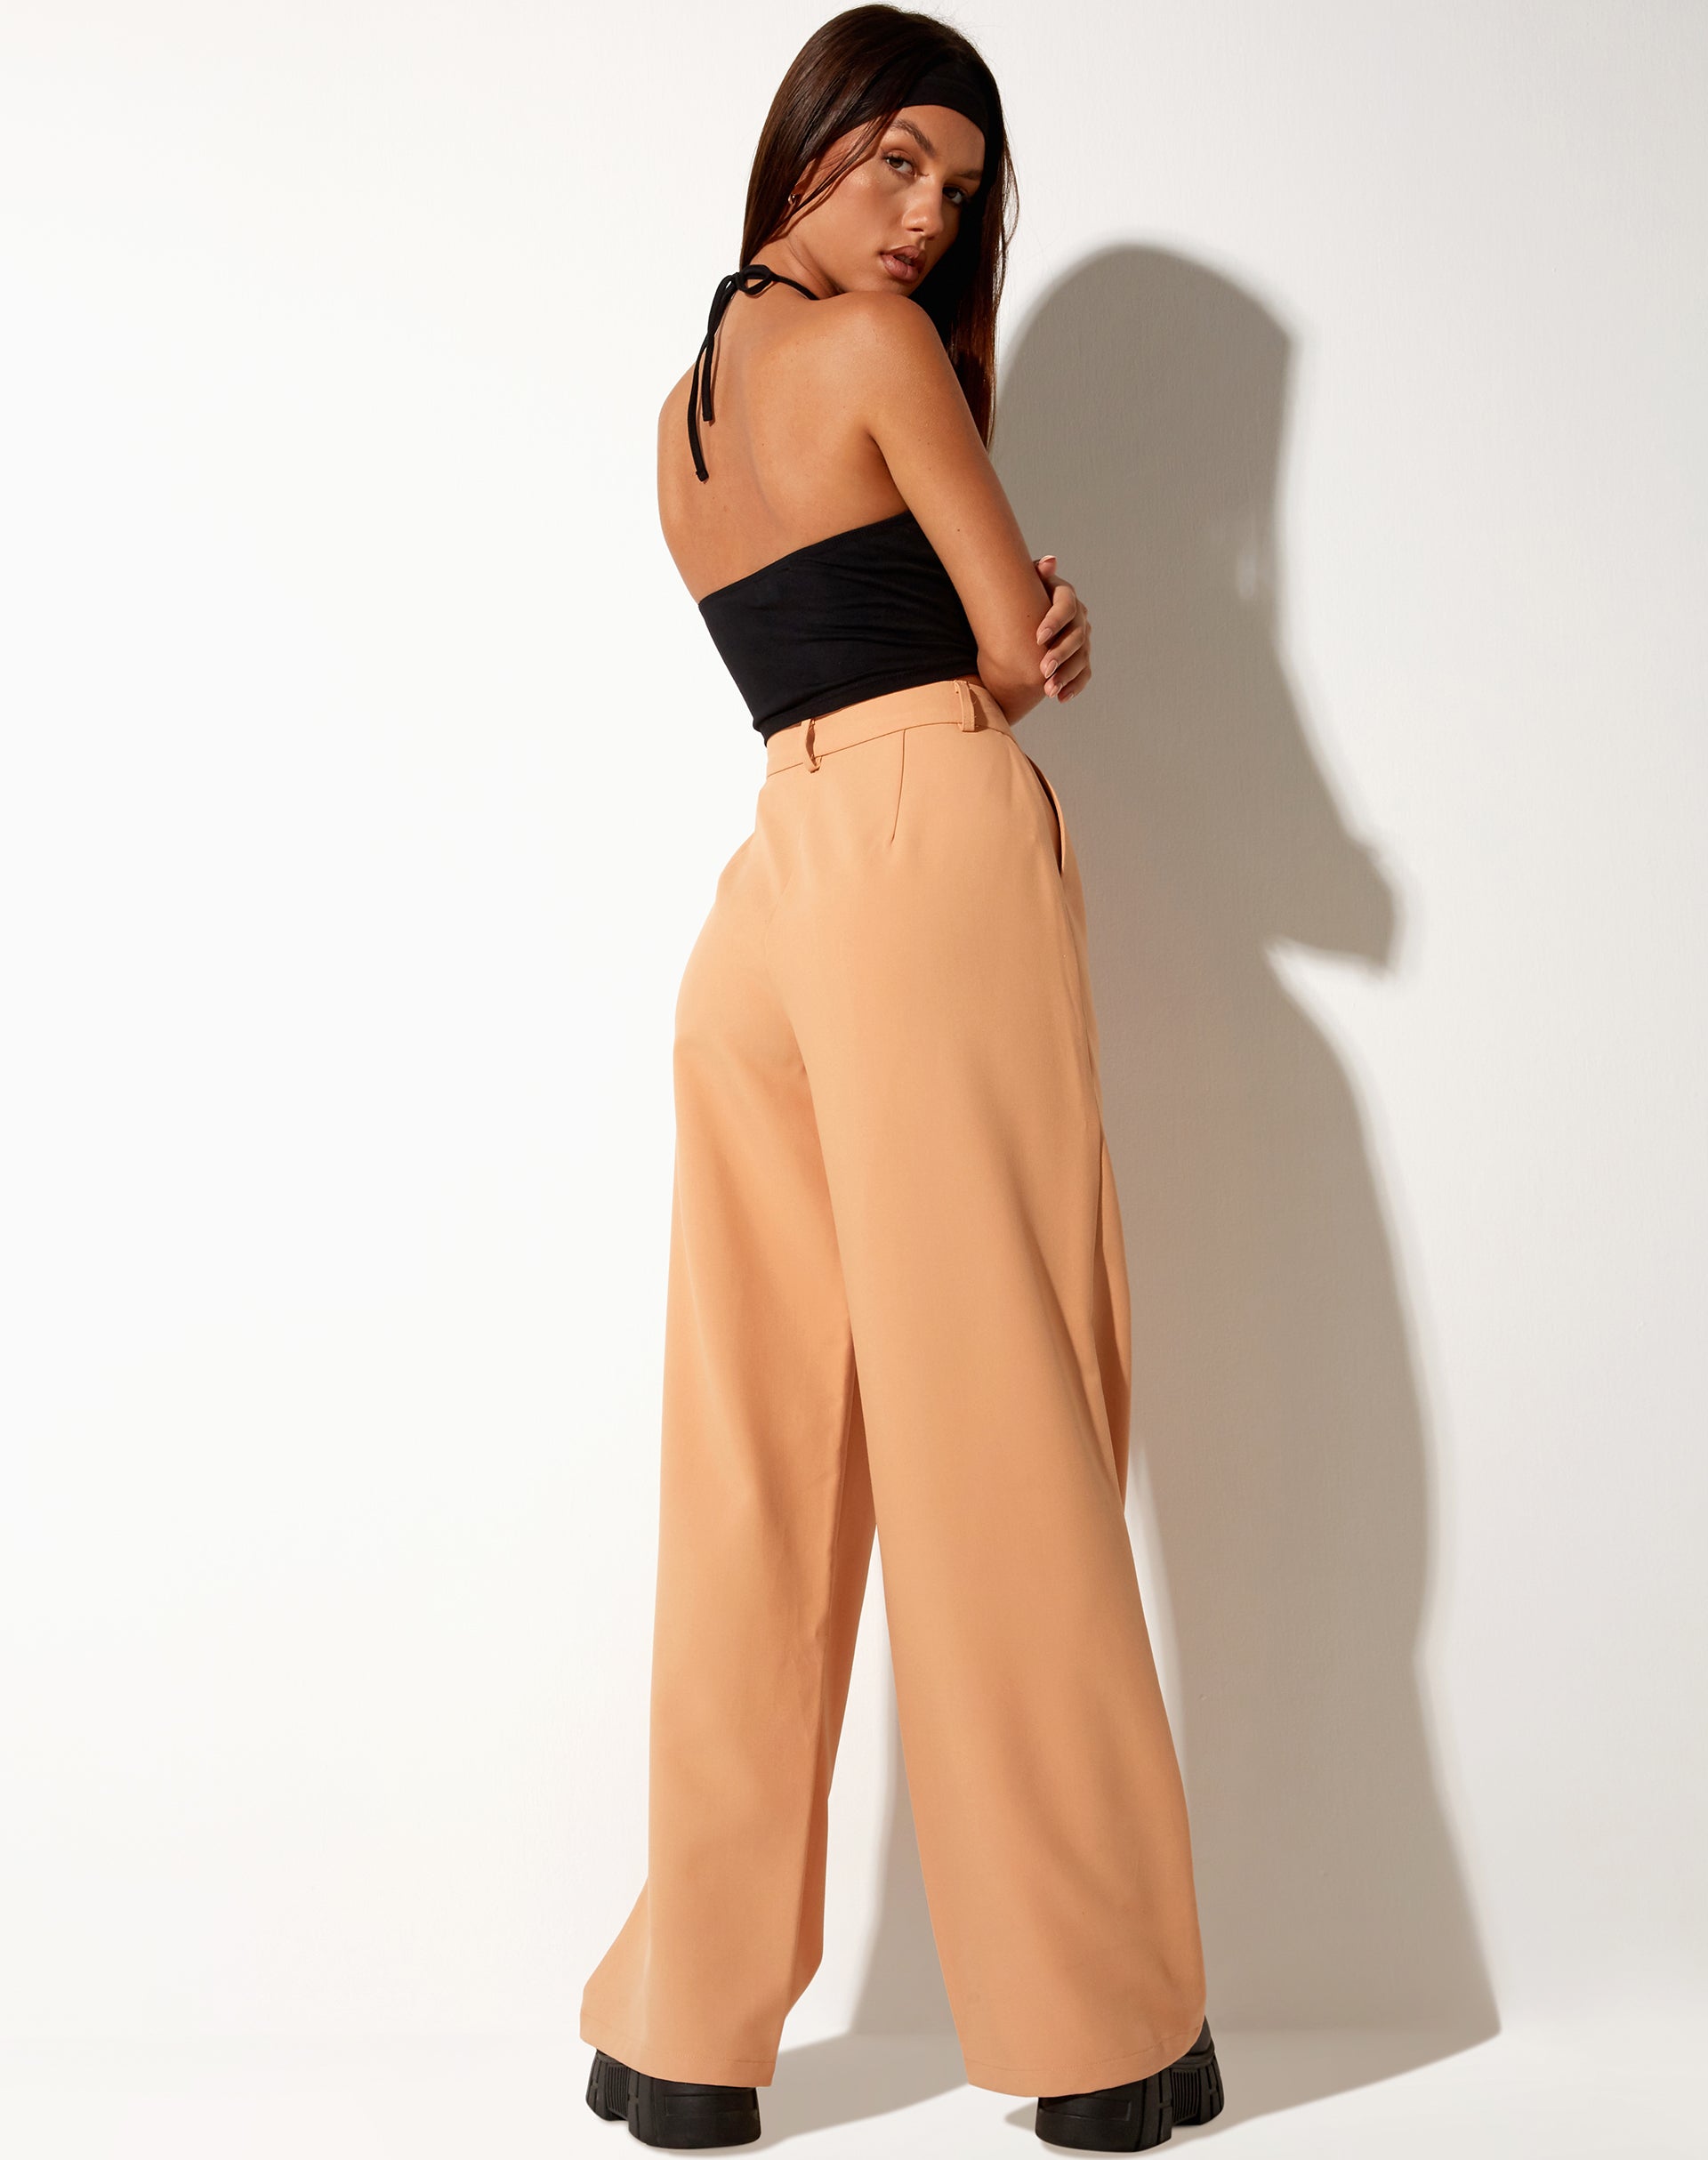 Image of Abba Trouser in Washed Peach